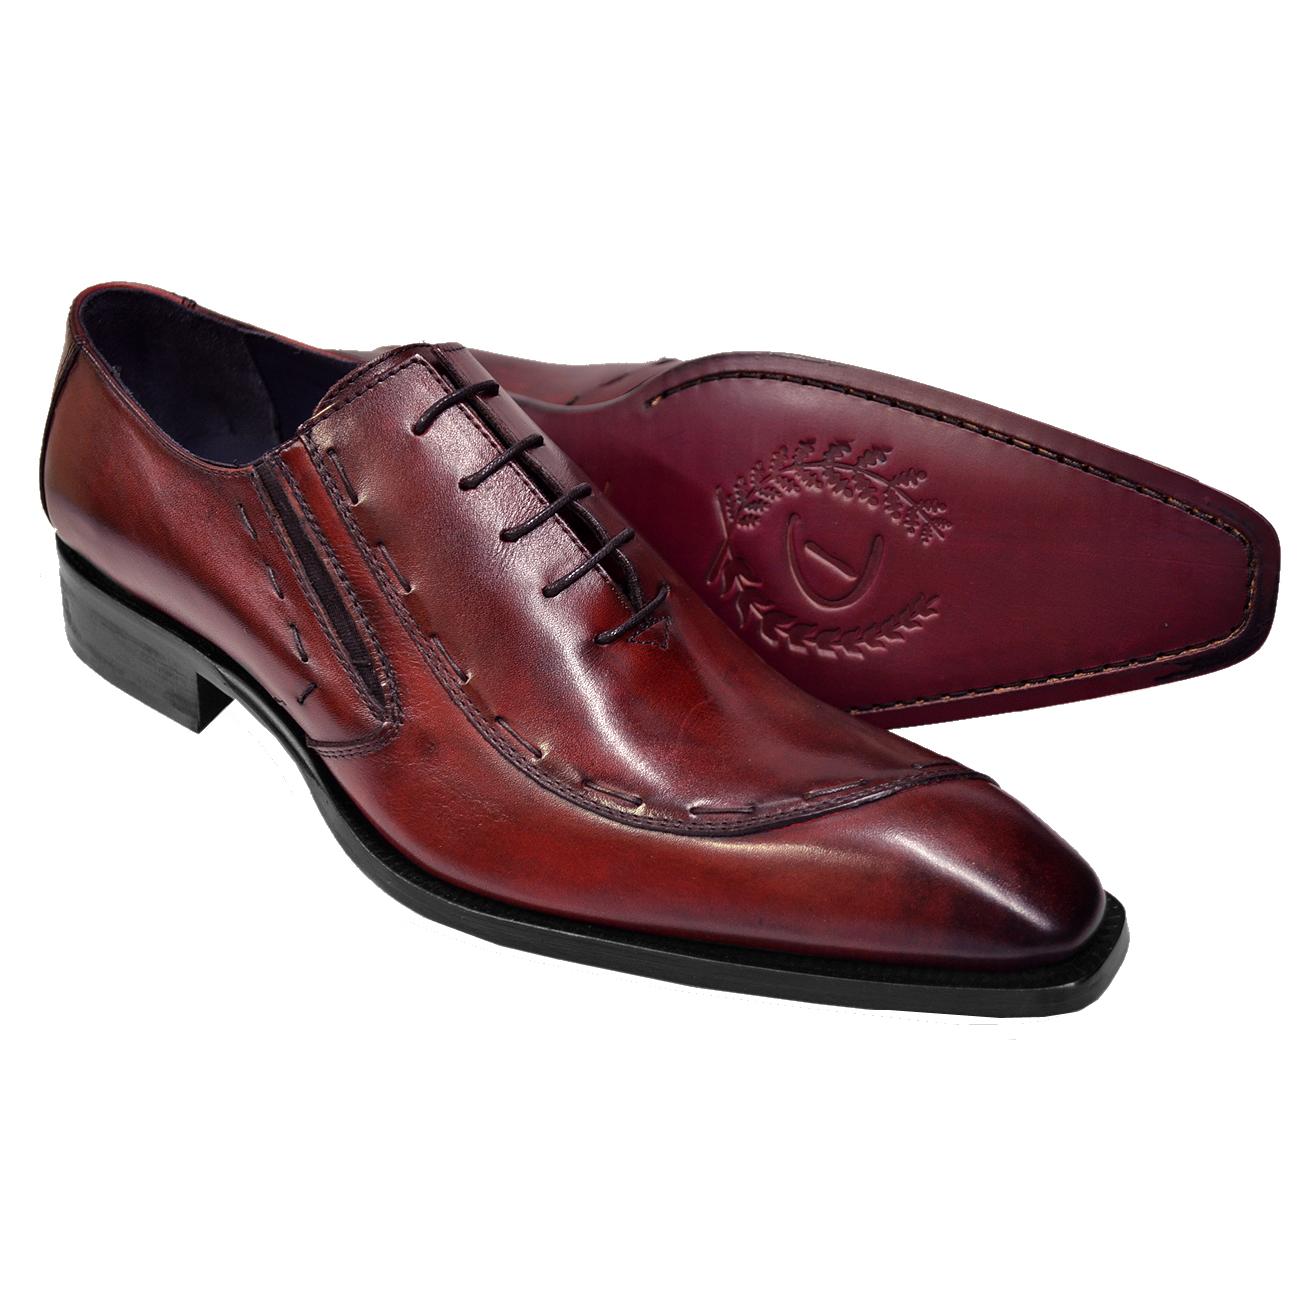 Duca 066 Burgundy Hand Painted Burnished Italian Calfskin Oxford Shoes ...